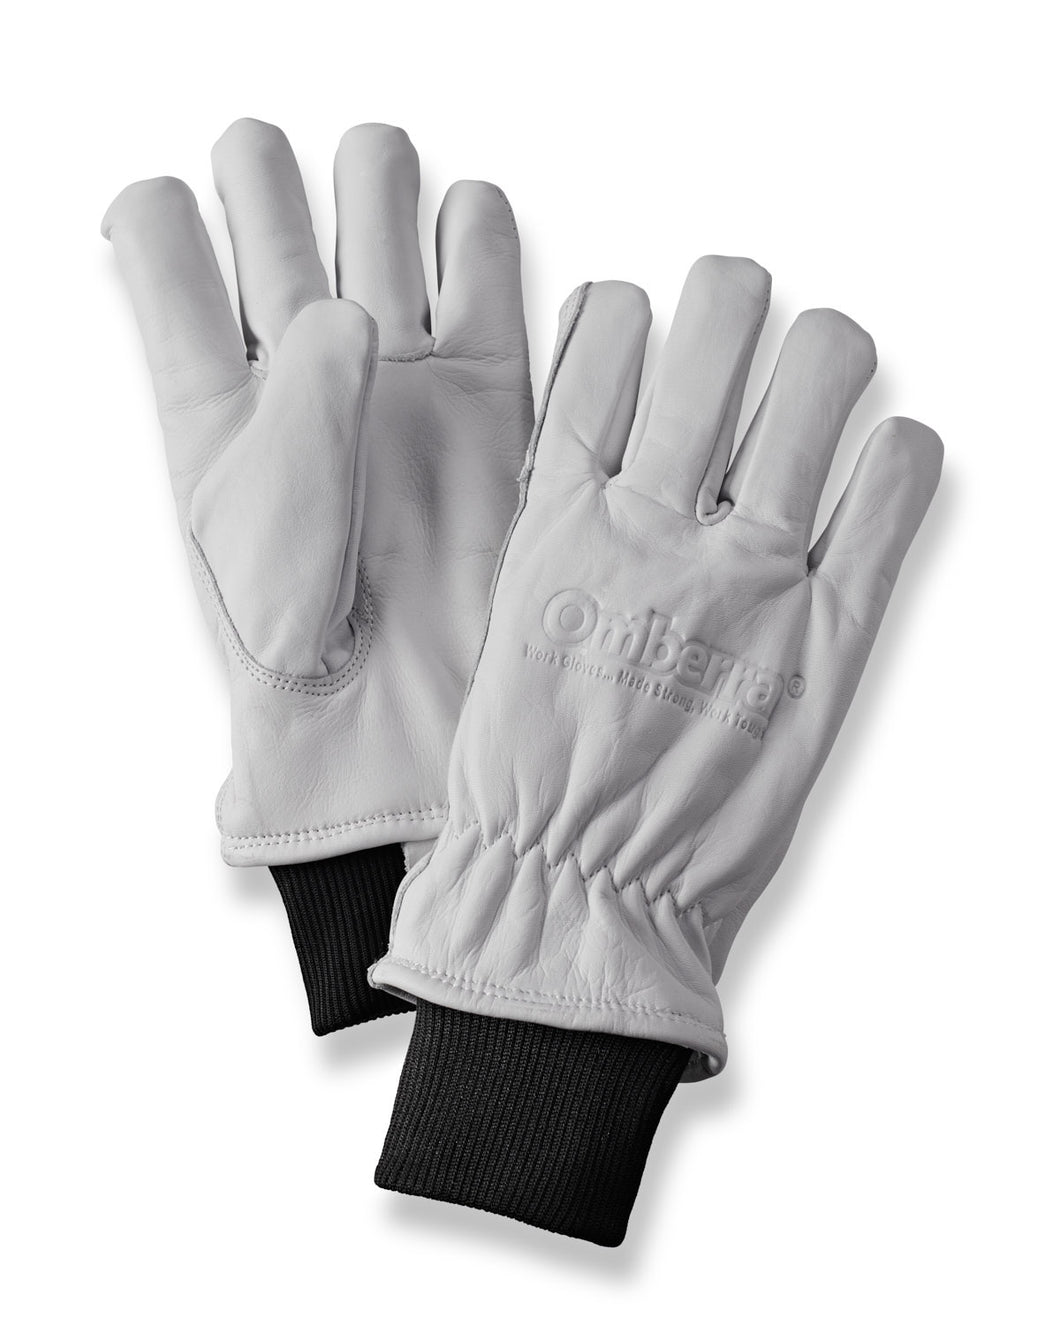 Premium Leather Gloves Cowhide Thinsulate 12 Pair Pack